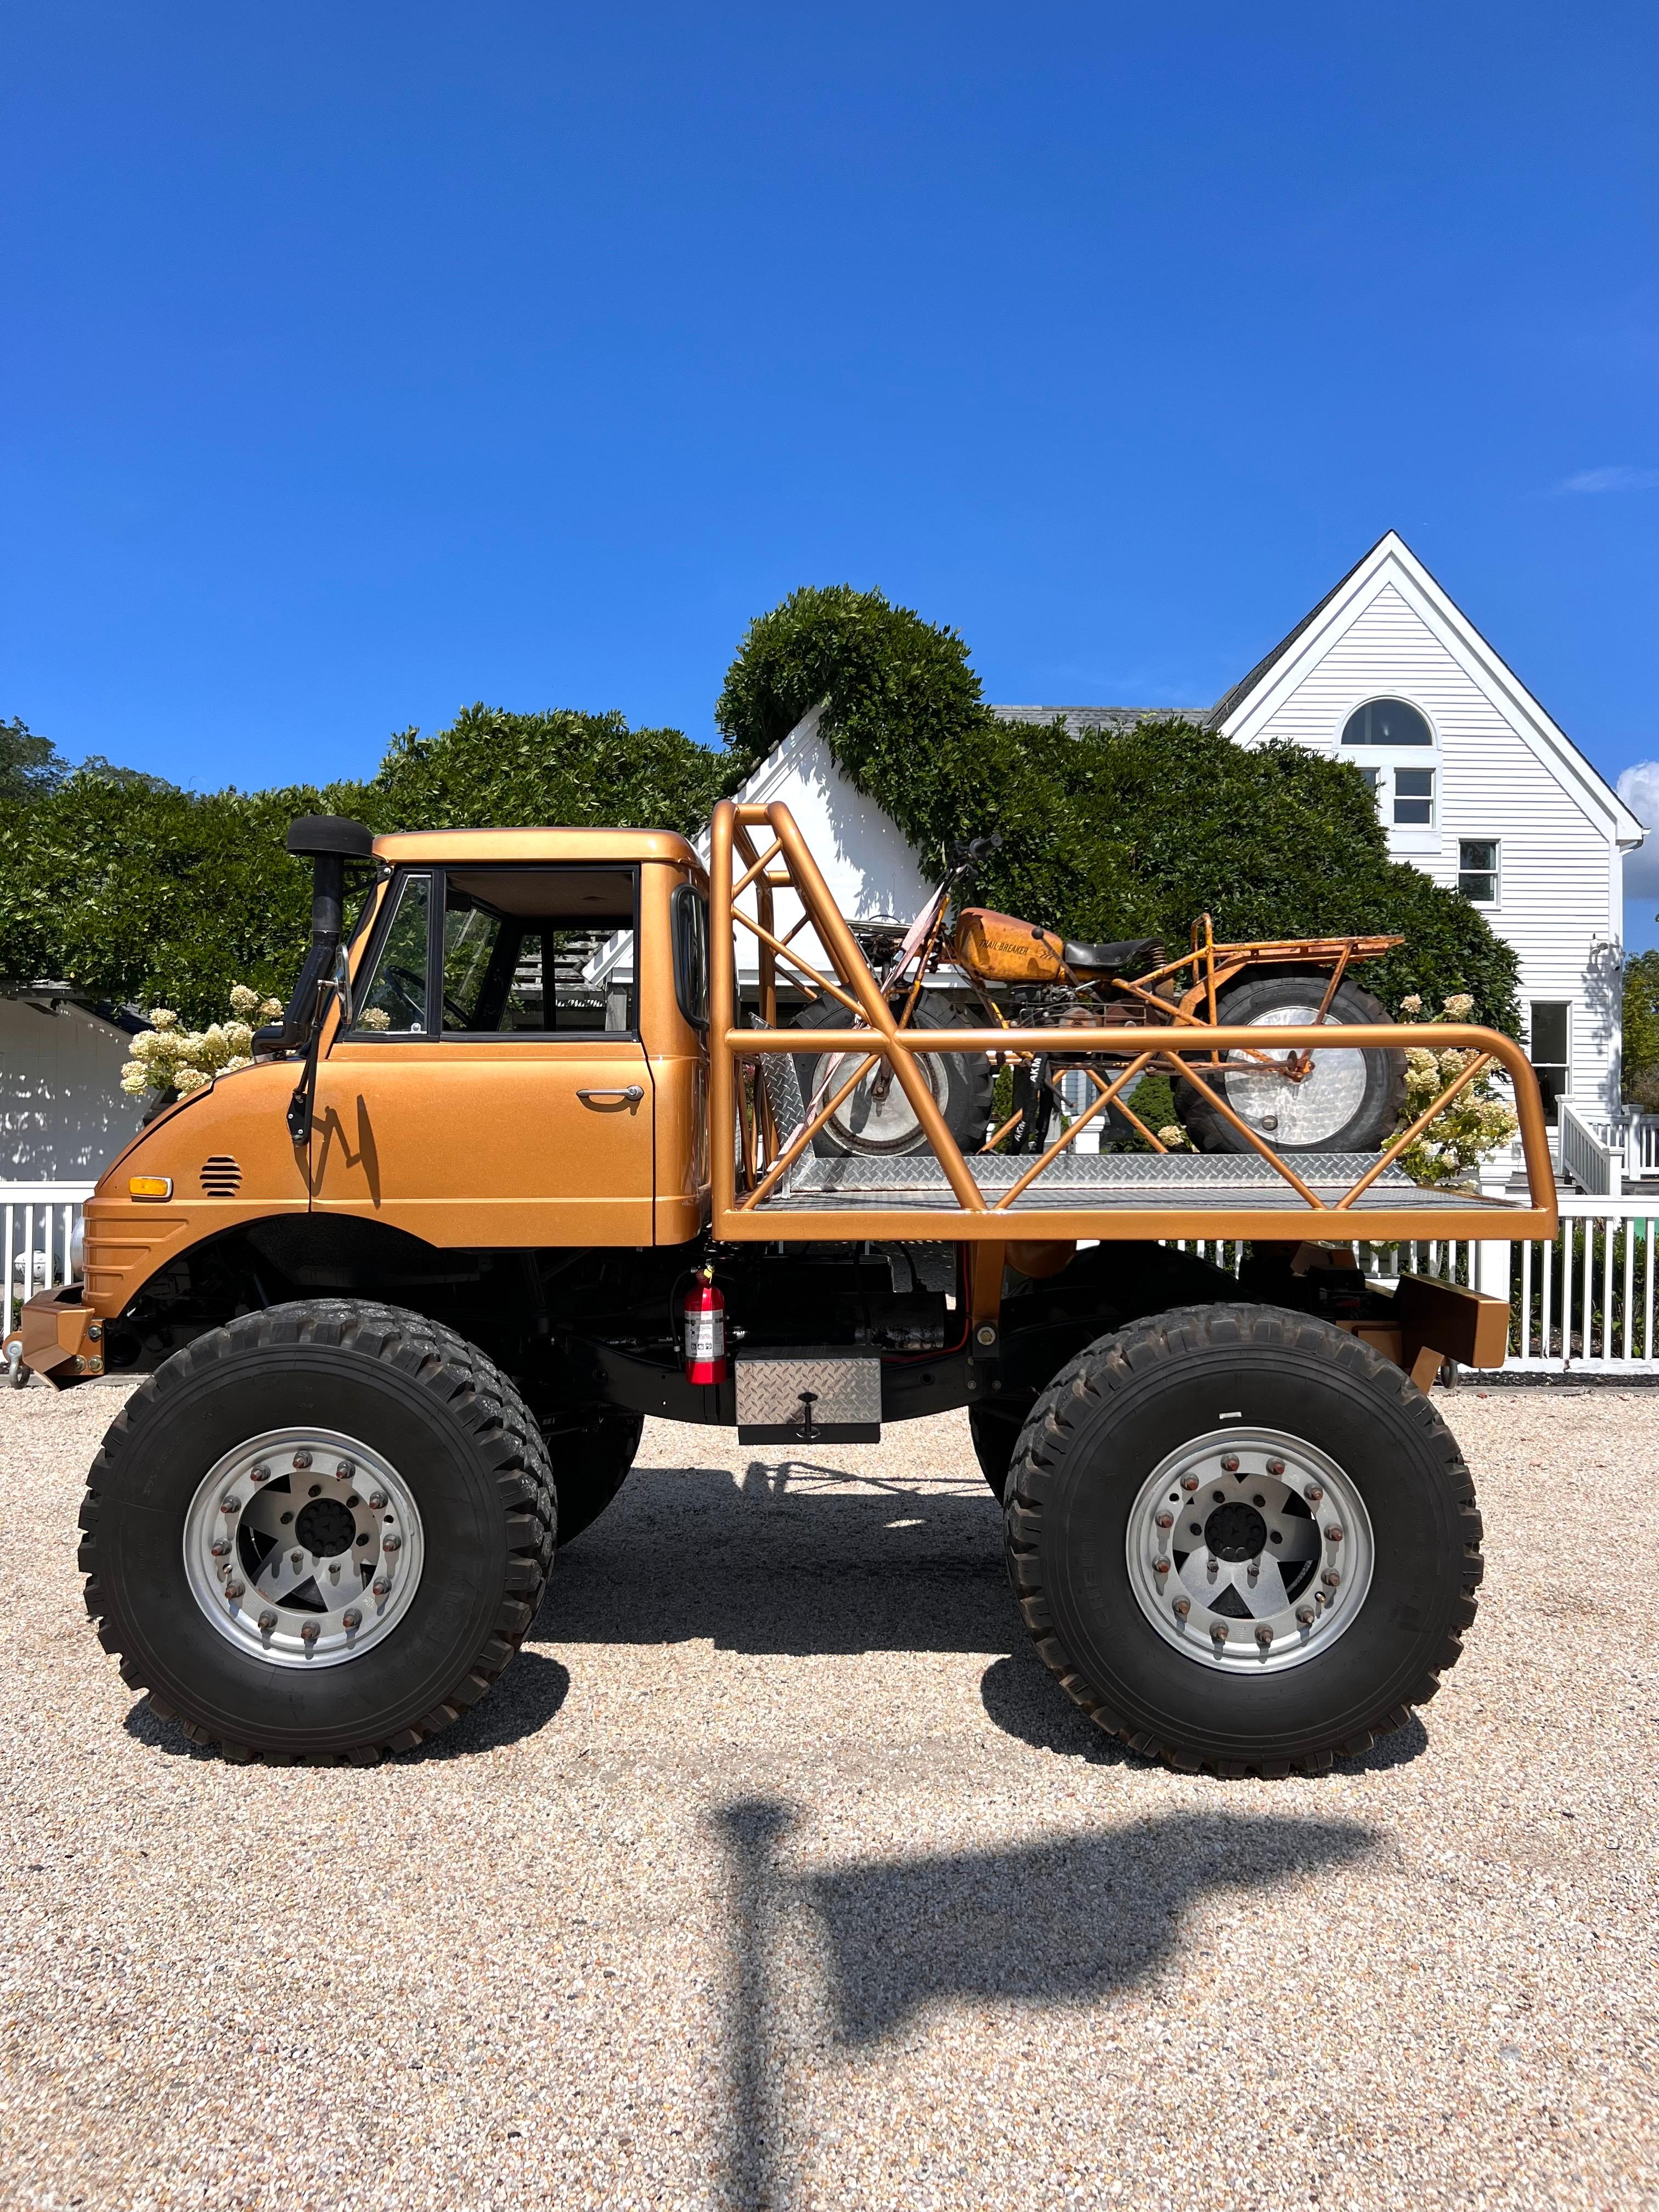 Incredible 1970 Mercedes Benz 406 Unimog in gold. Sold with a matching late 1960s Rokon Trailbreaker motorcycle strapped to the truckbed. Extremely heavy duty and powerful Mercedes truck. Engine recently serviced and in excellent condition. Working